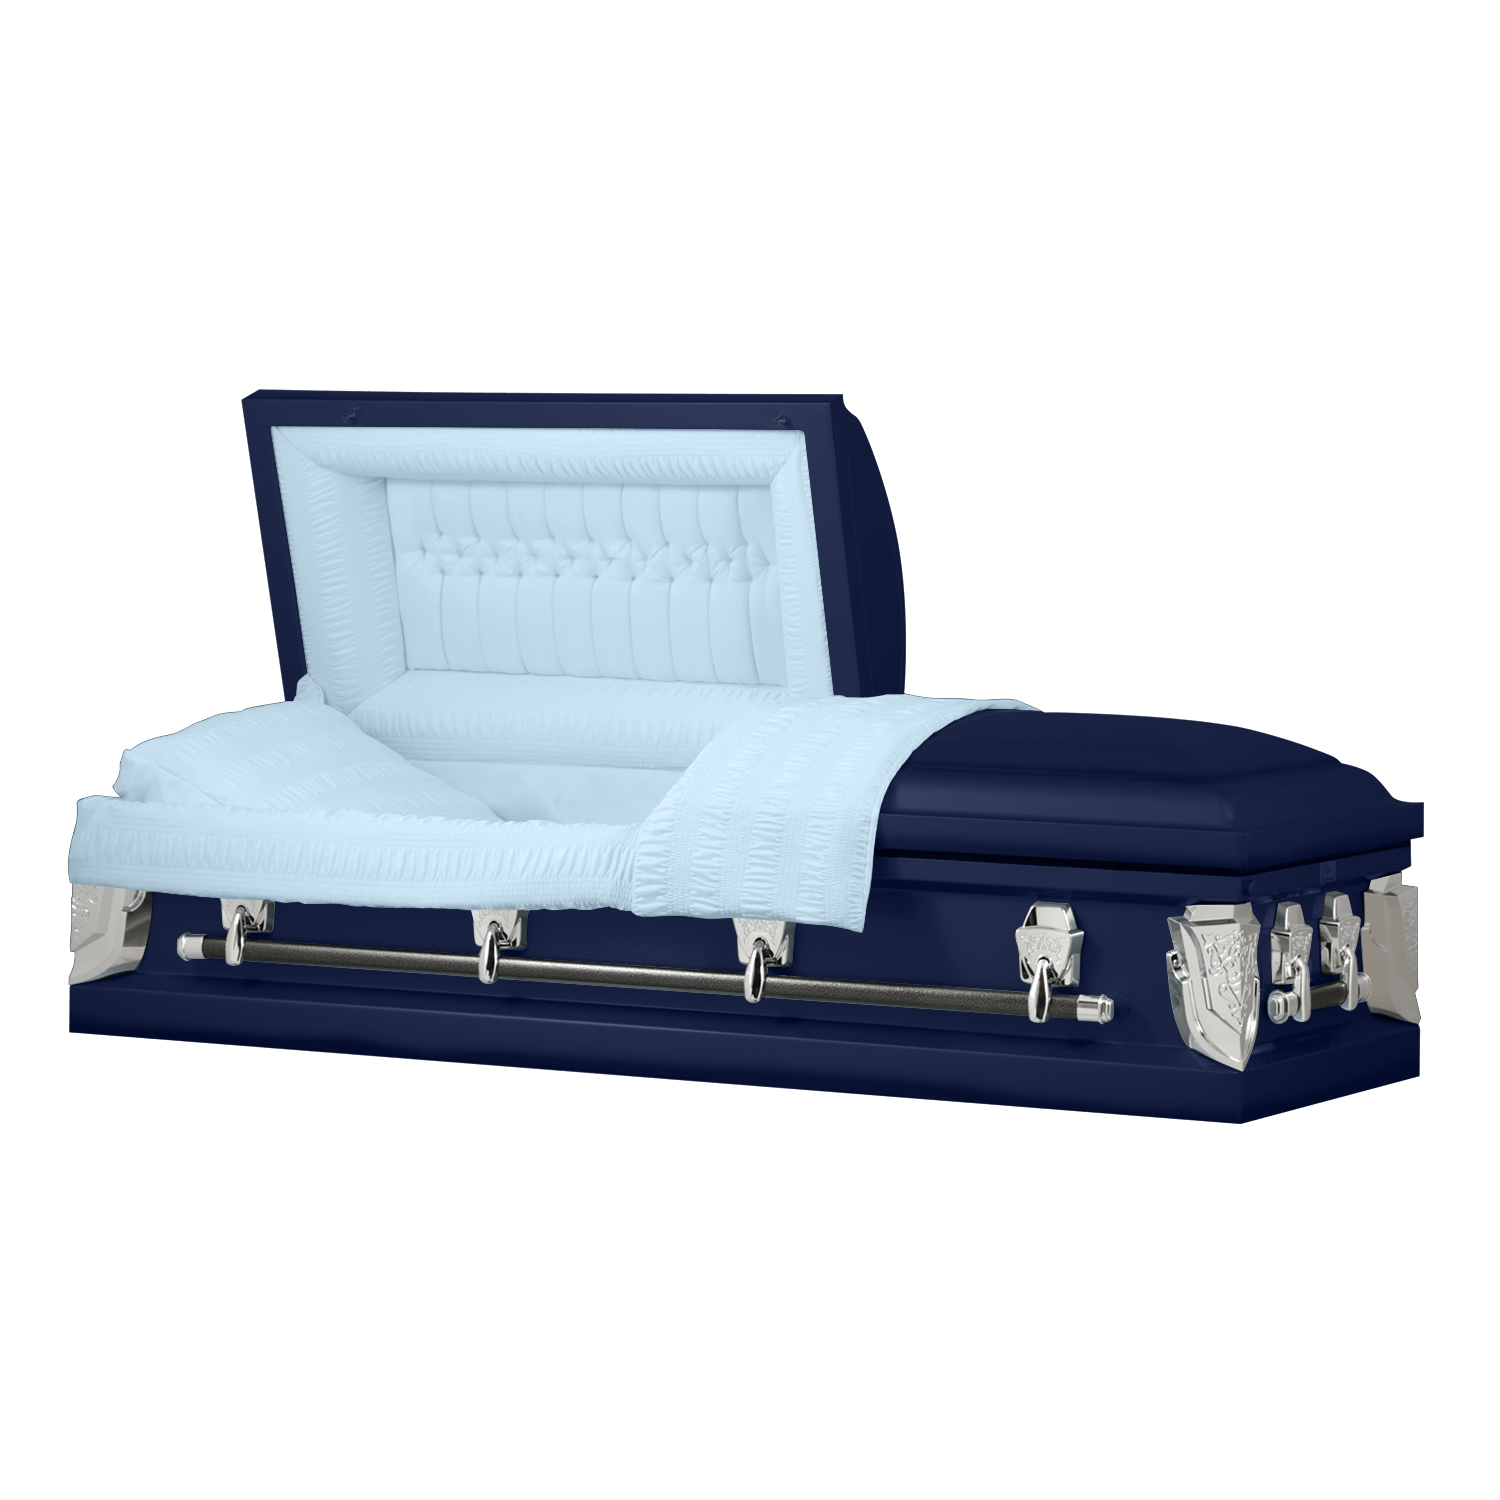 What To Expect Opening A Casket After 10 Years? – Titan Casket